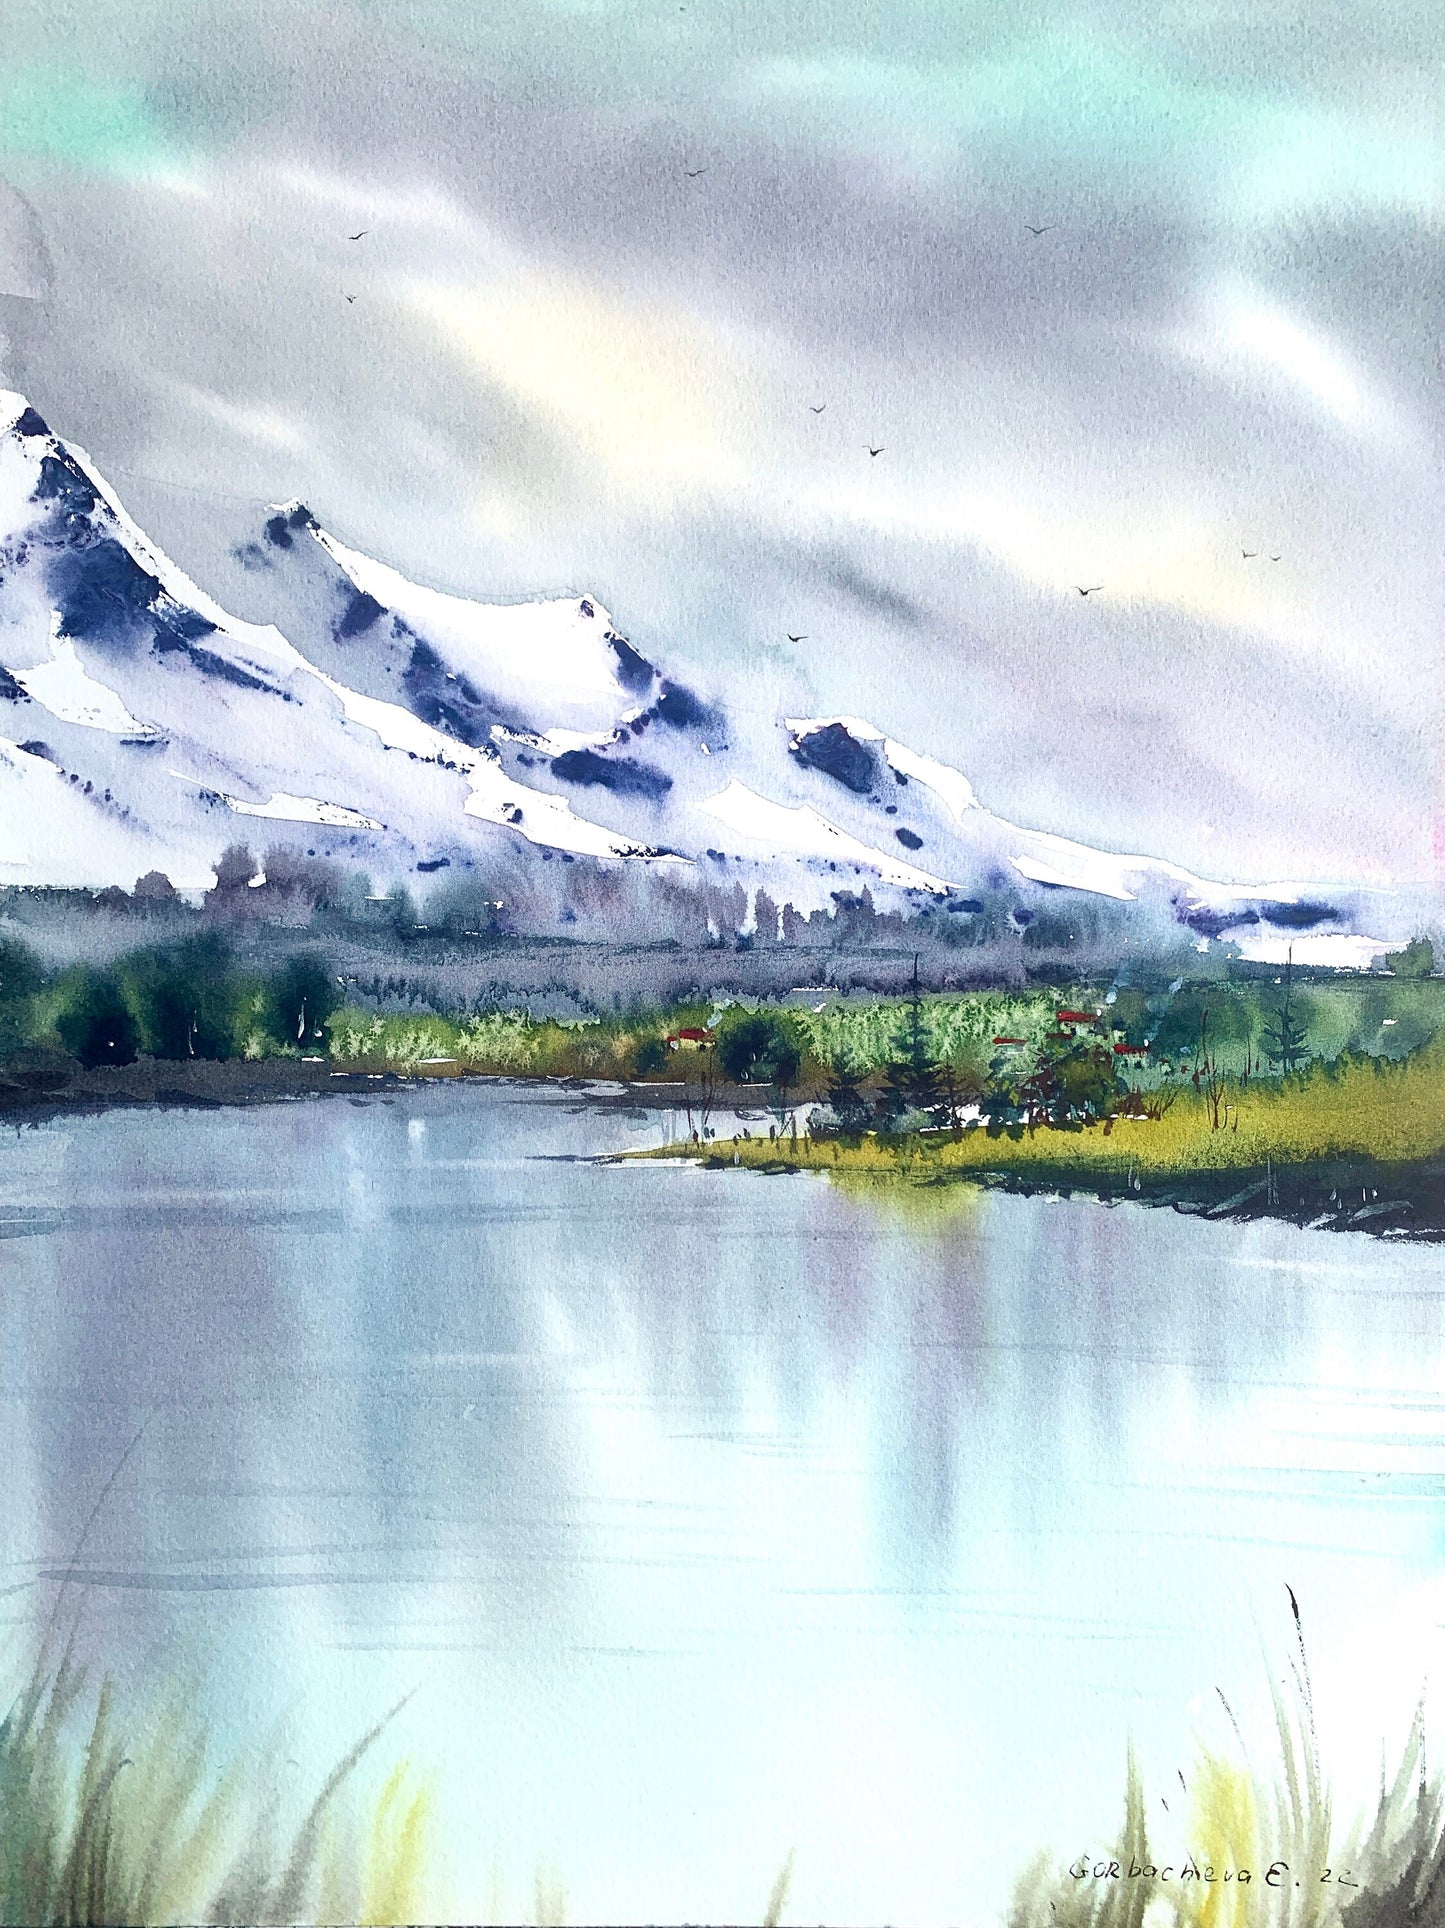 Mountain Lake House Painting Original Watercolor, Abstract Landscape, Modern Art Decor, Gift for Nature Lover